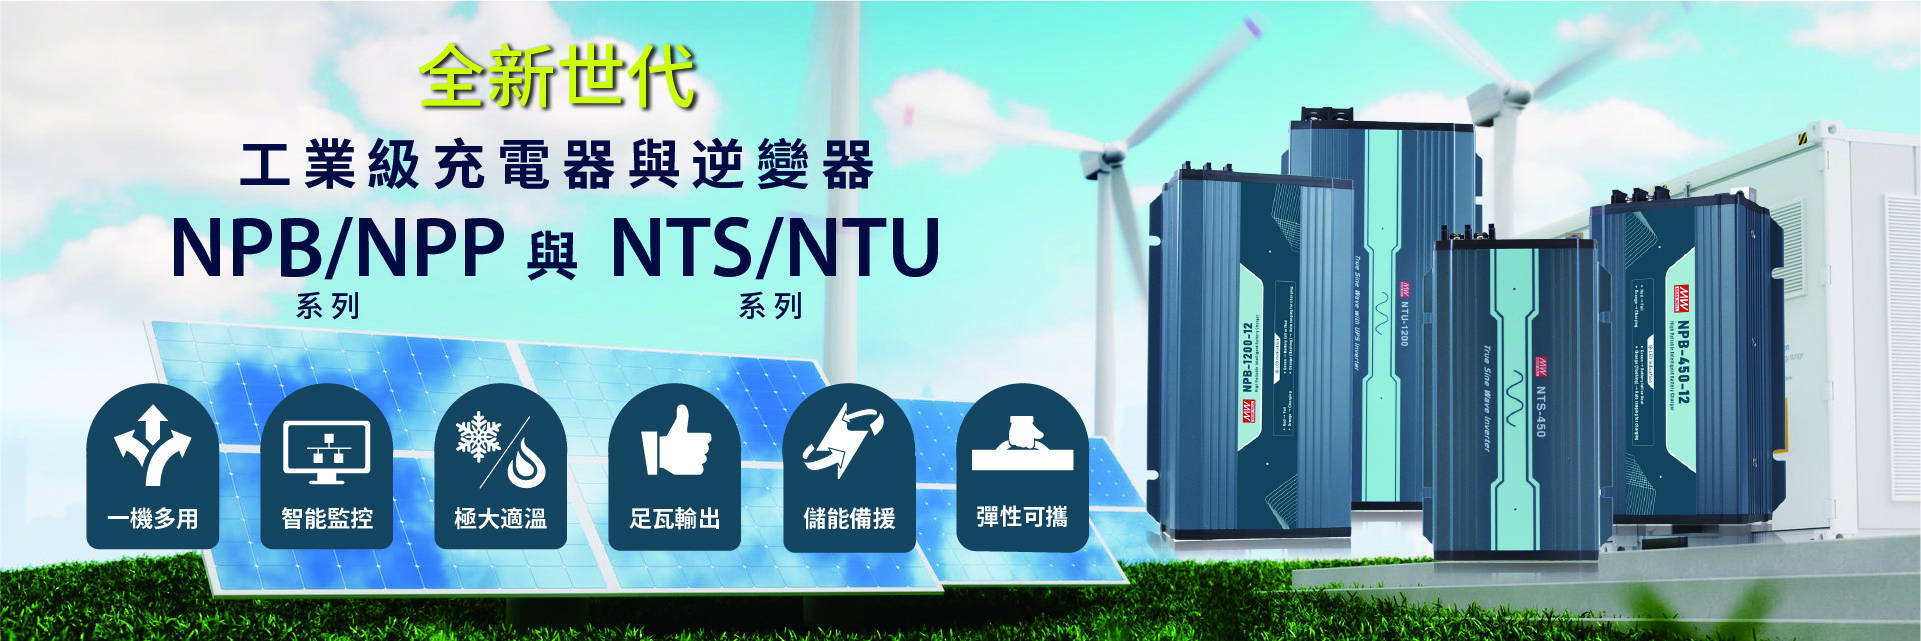 MEAN WELL NPB, NPP, NTS, NTU series, new generation industrial grade charger and inverter